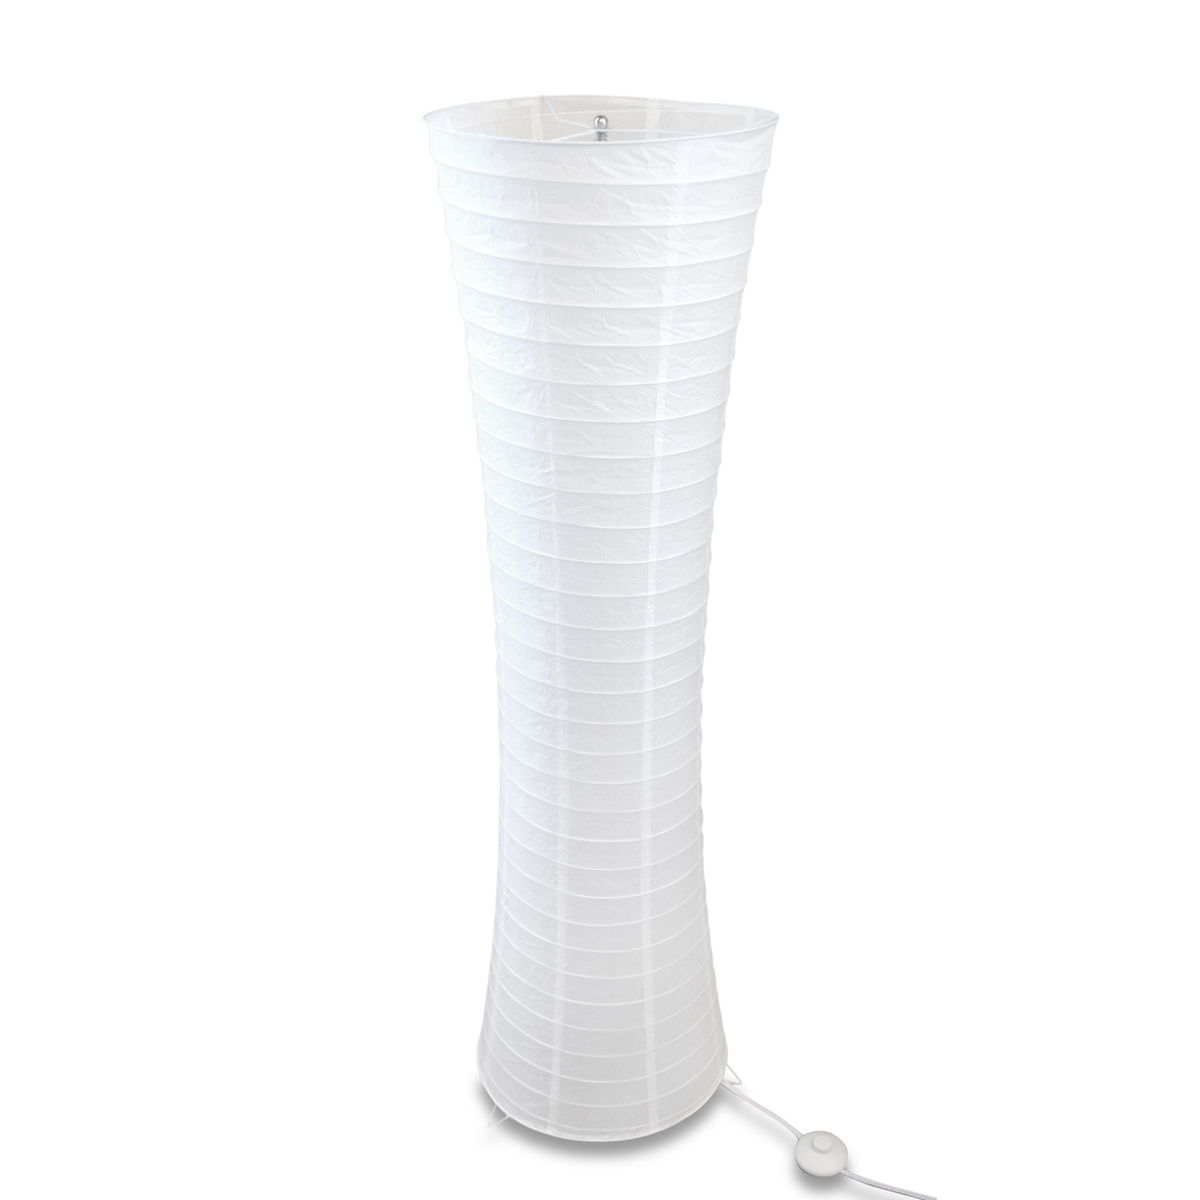 4-FT Cylinder Paper Lantern Floor Lamp Shade - 14-inch x 48-inch (SHADE ONLY)